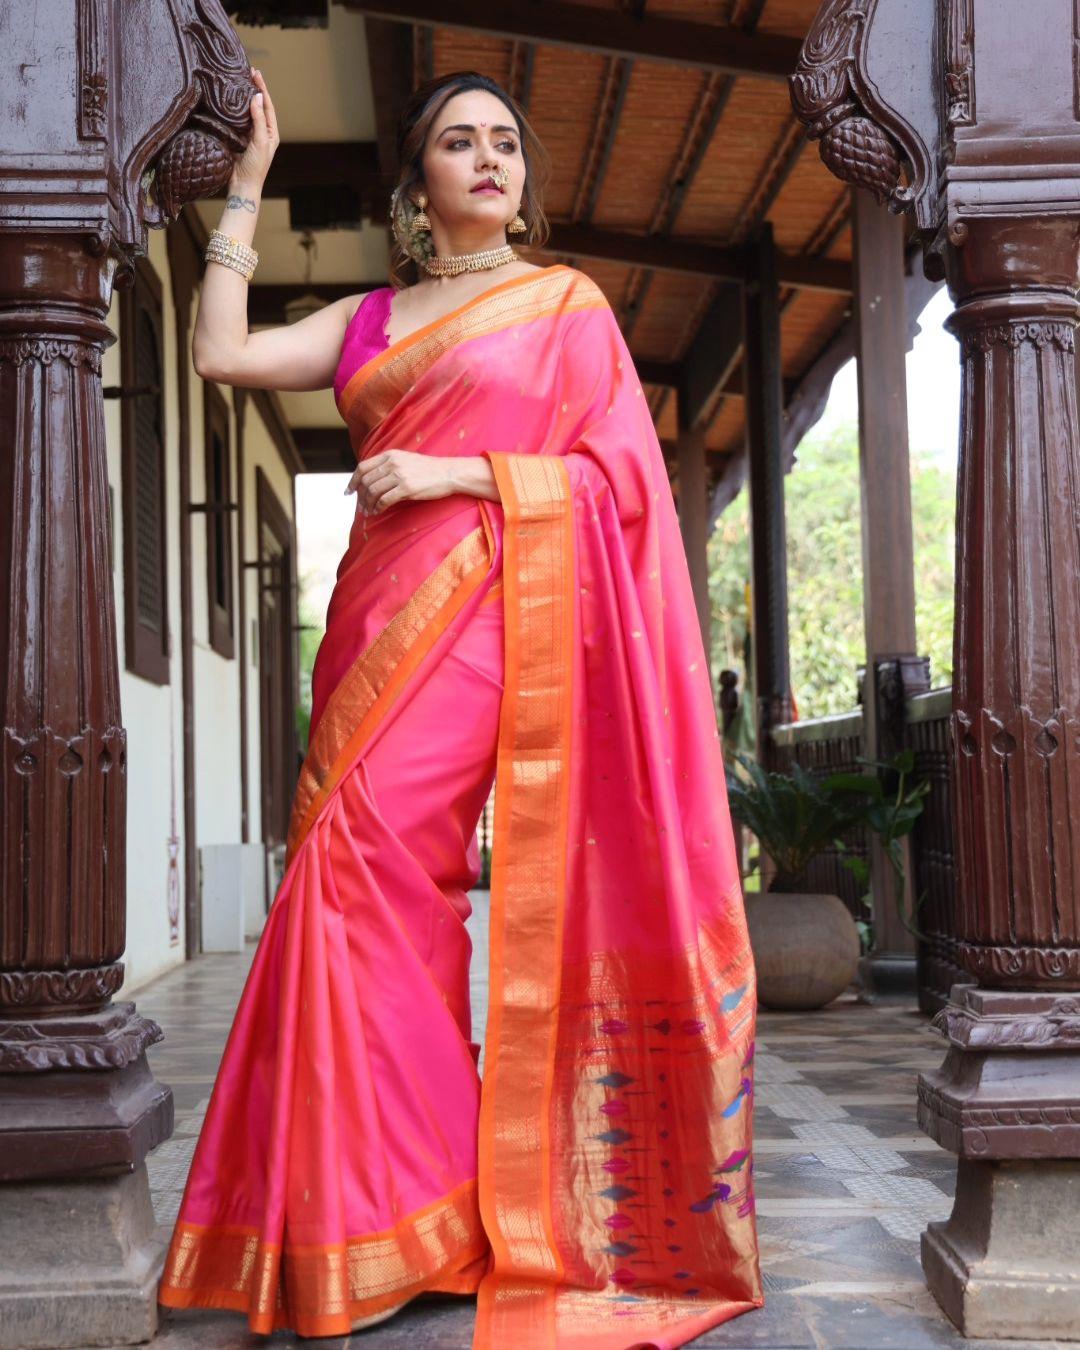 No one can beat Amruta Khanvilkar when it comes to styling a stunning Pathani. On the occasion of Gudi Padwa, the actress wore a stunning pink saree with an orange border. The actress elevated the look with a stunning gajra